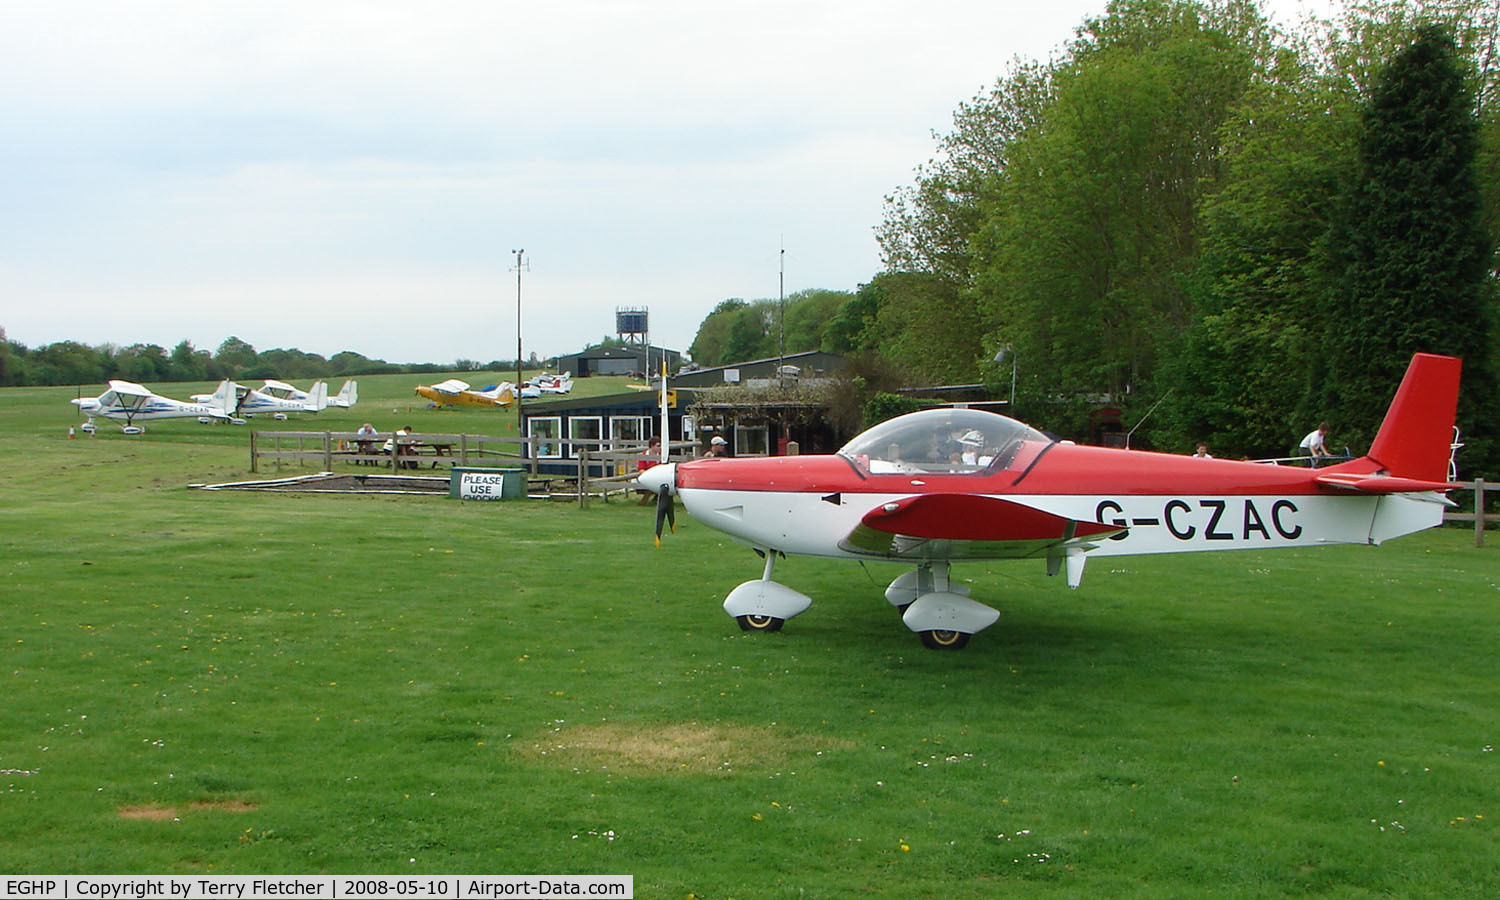 Popham Airfield Airport, Popham, England United Kingdom (EGHP) - Popham airfield in the heart of ' Englands green and pleasant land '